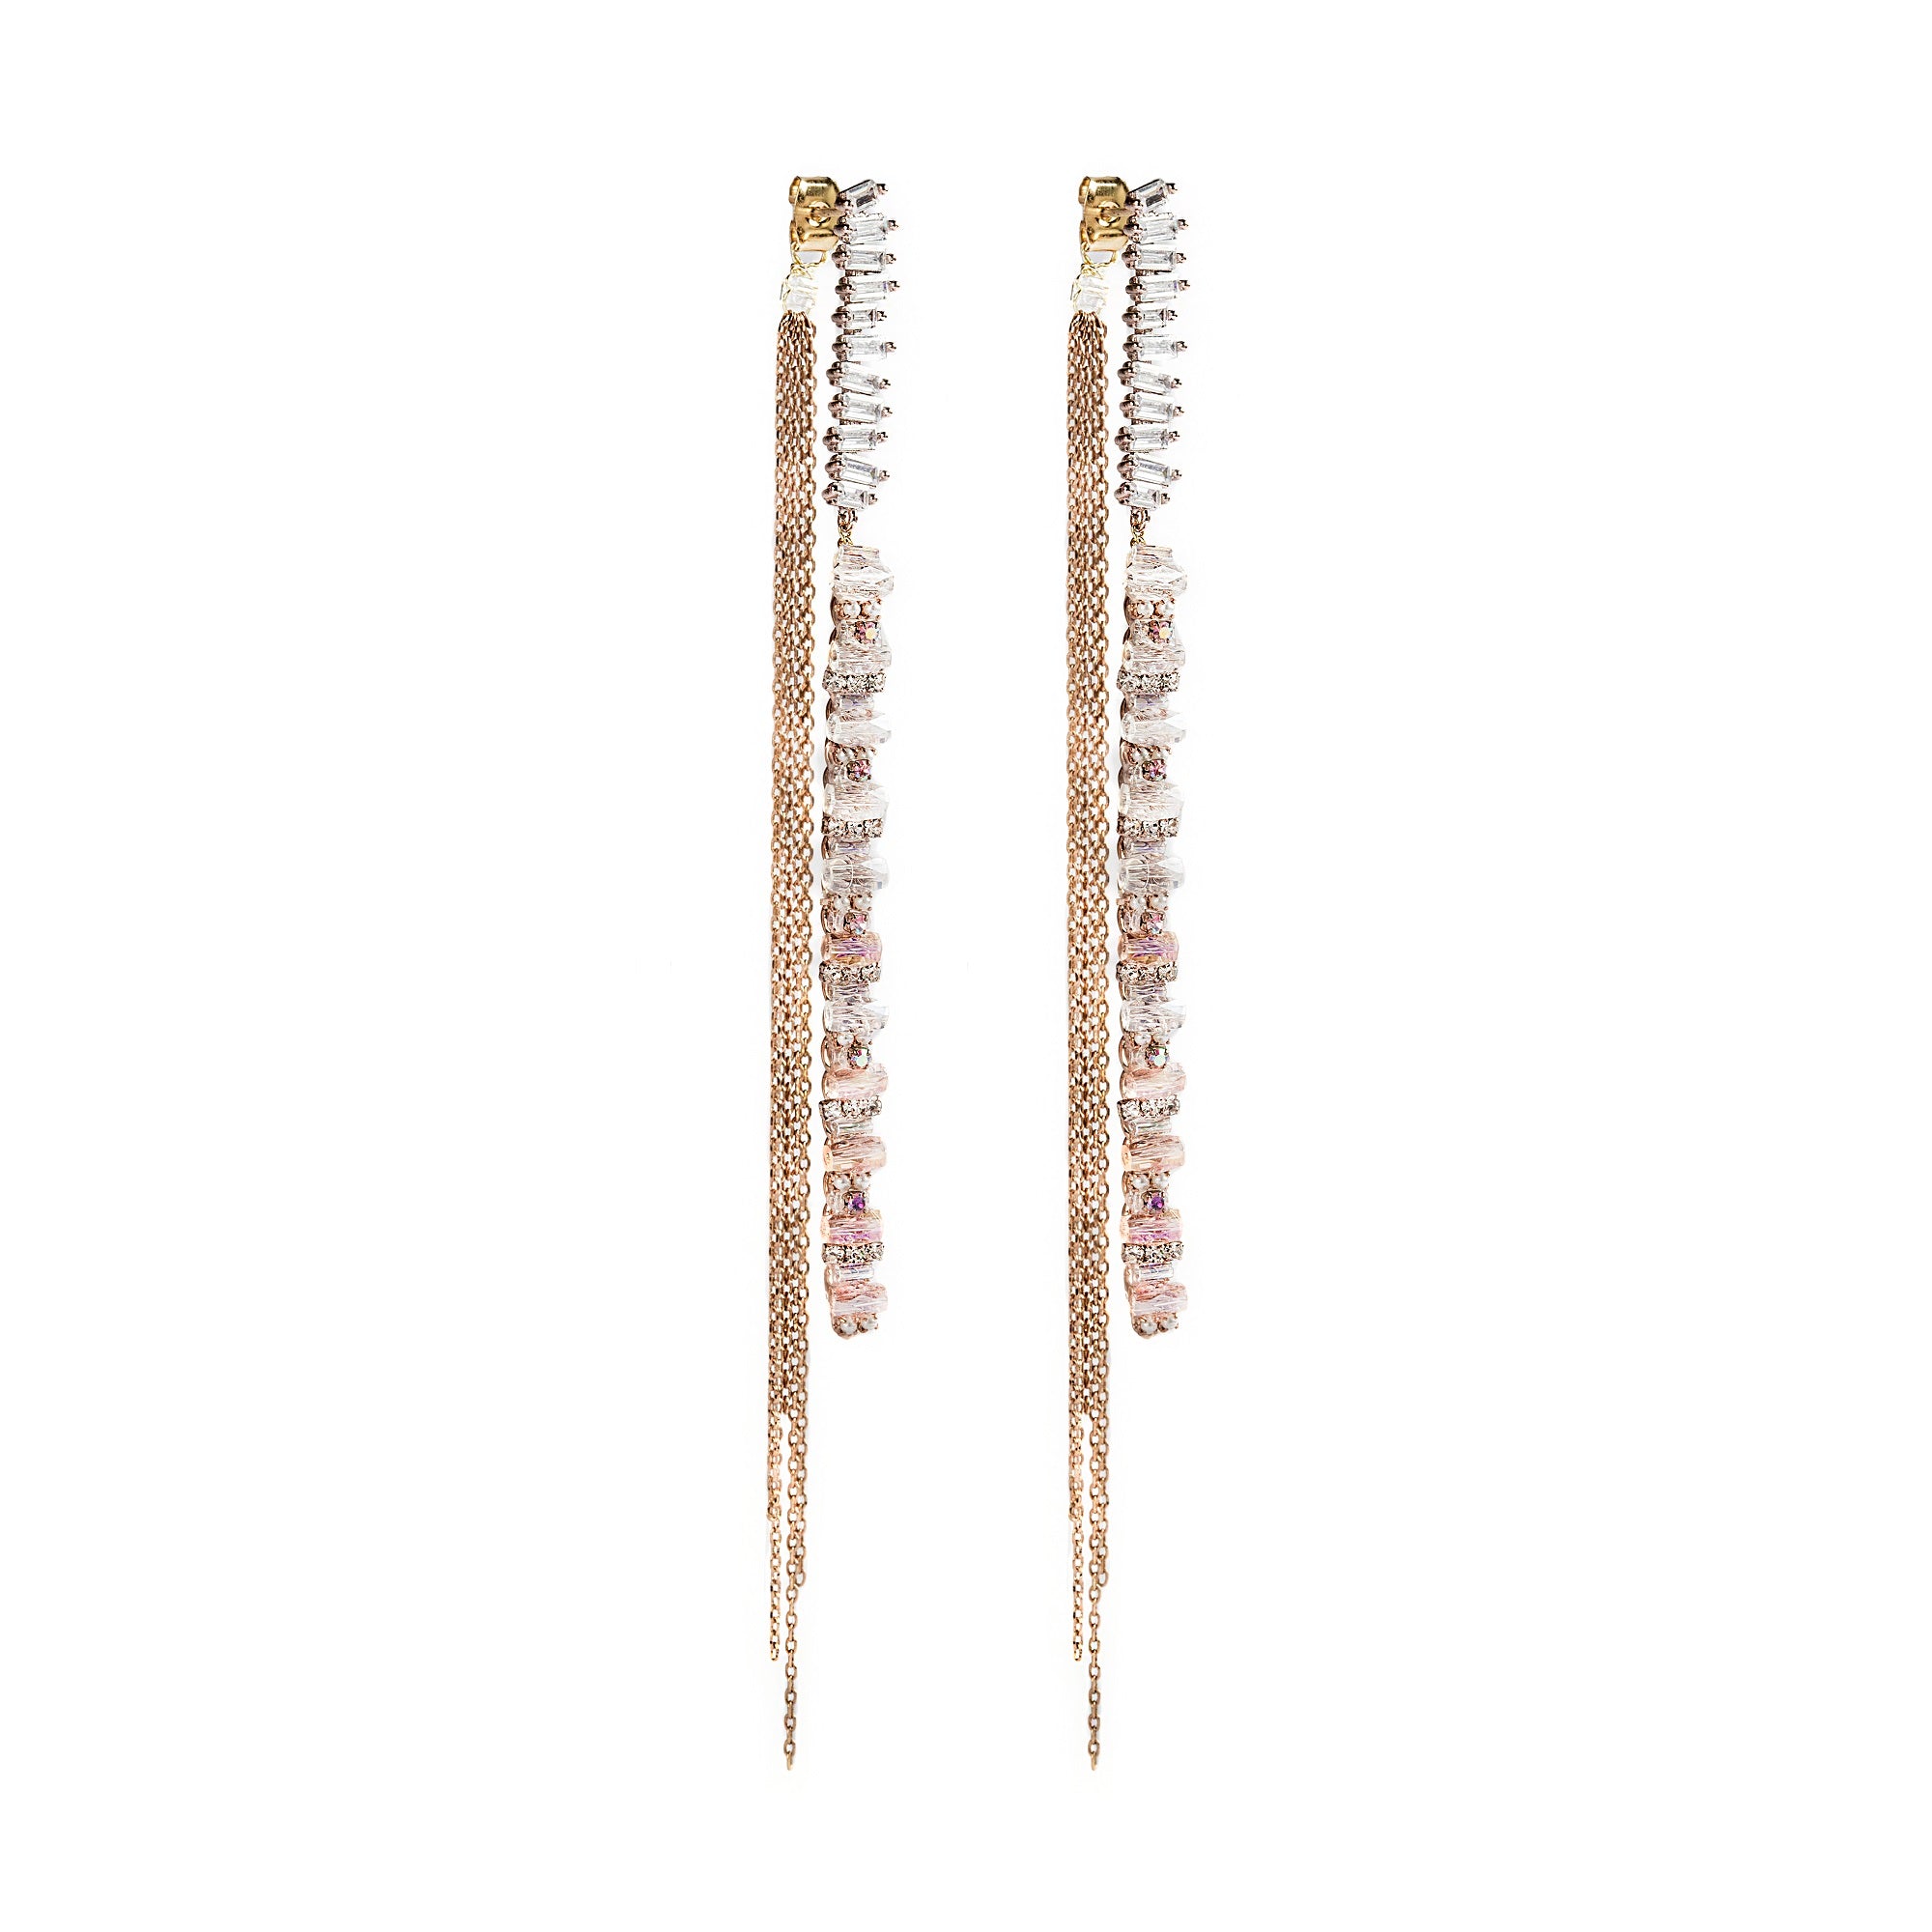 925 GOLD BAGUETTE CRYSTALS, BEADS AND CHAINS EARRINGS